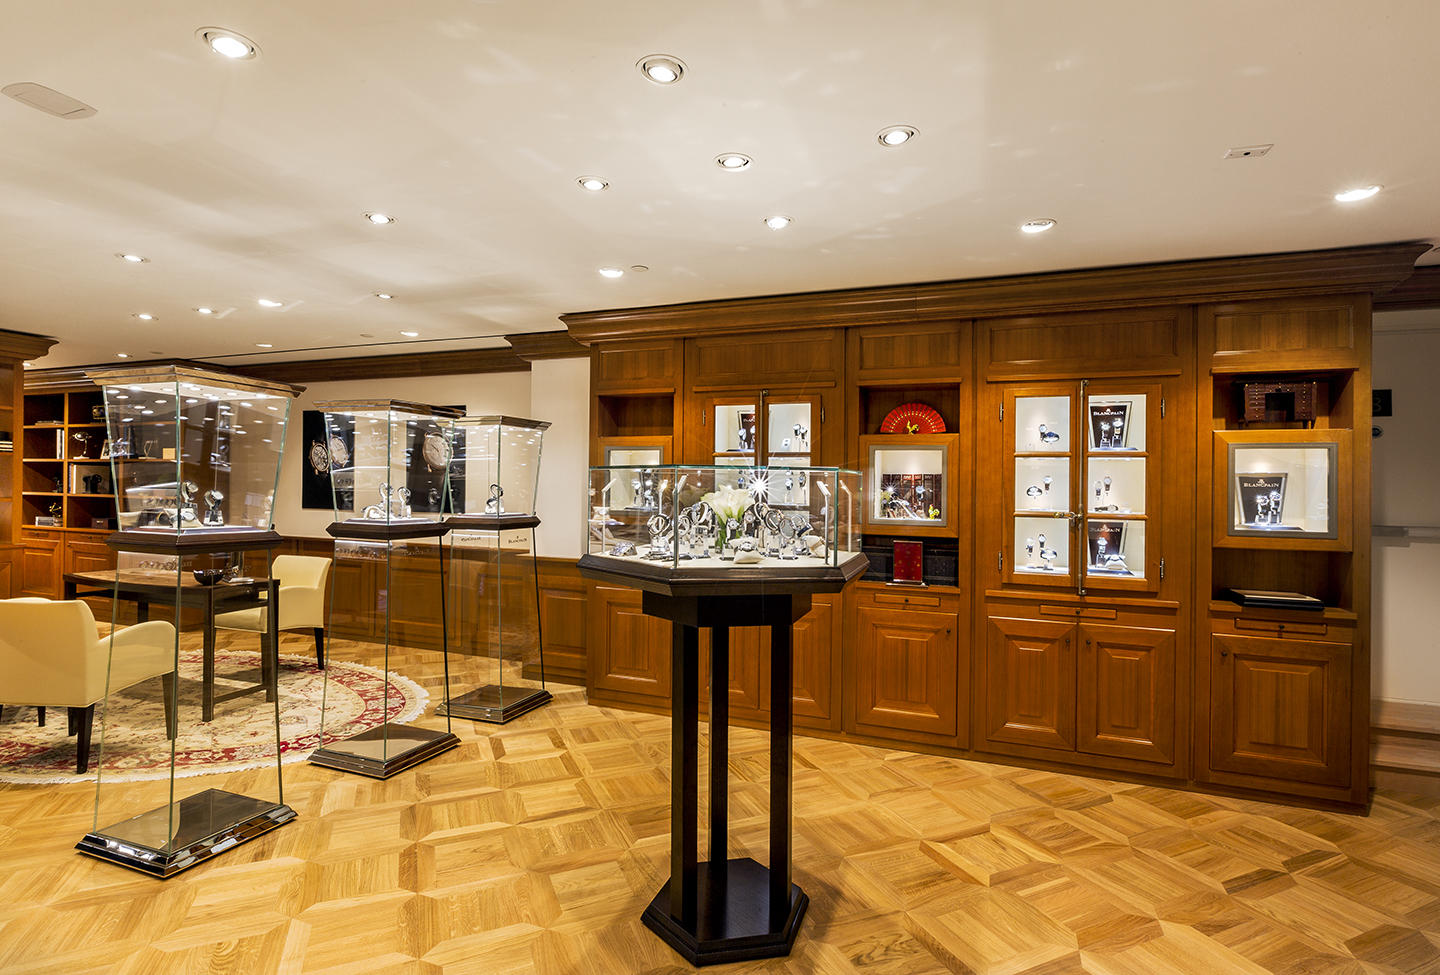 Blancpain Watches interior and exterior architectural photographs of the retail store on Fifth Avenue New York City : IMAGES-Keywording : New York NY Architectural Photographer | Interior and Exterior